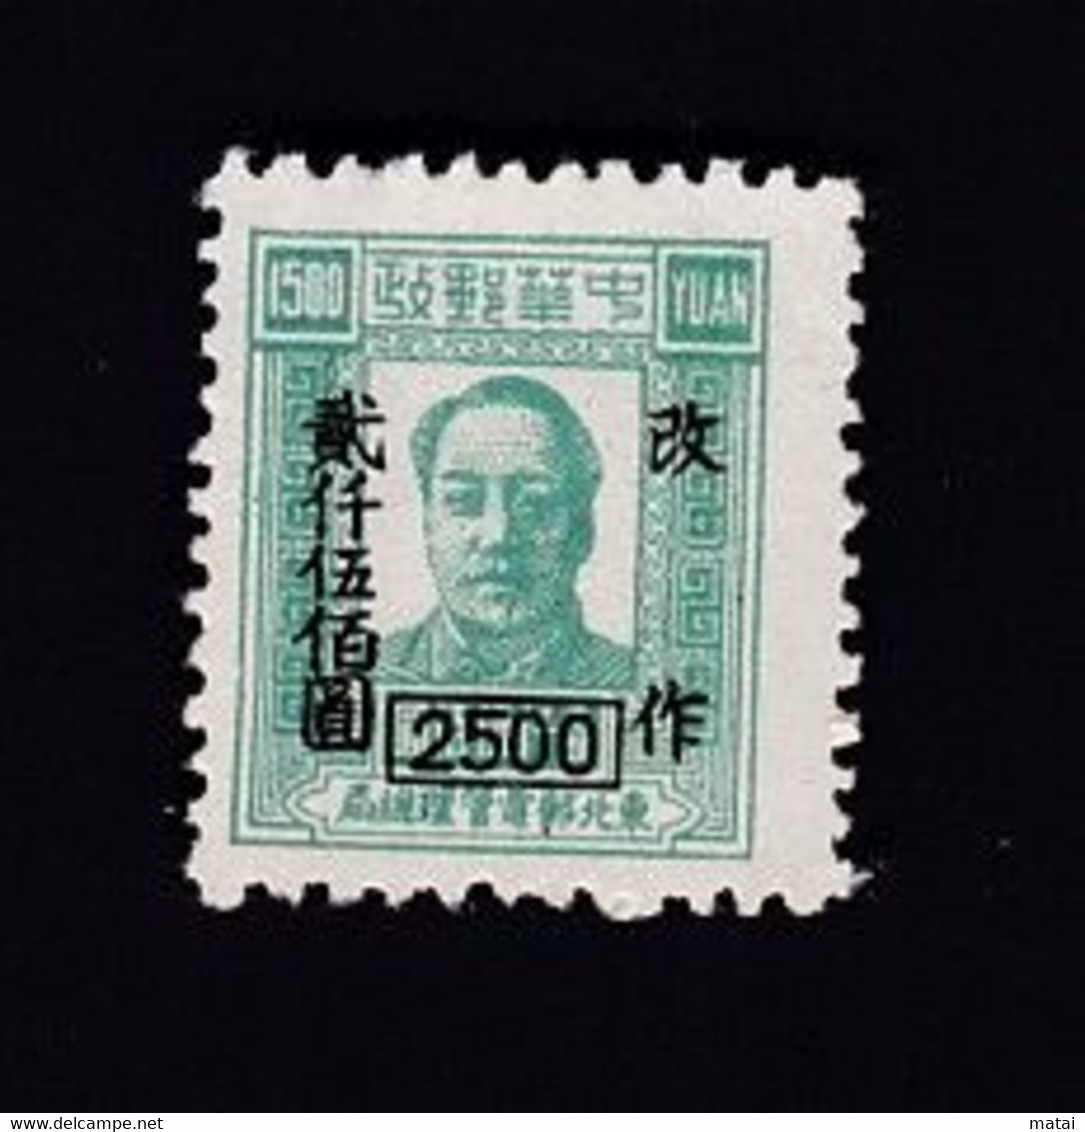 CHINA CINE CINA  THE CHINESE PEOPLE'S REVOLUTIONARY WAR PERIOD NORTHEAST PEOPLE'S POSTS STAMP - Chine Centrale 1948-49